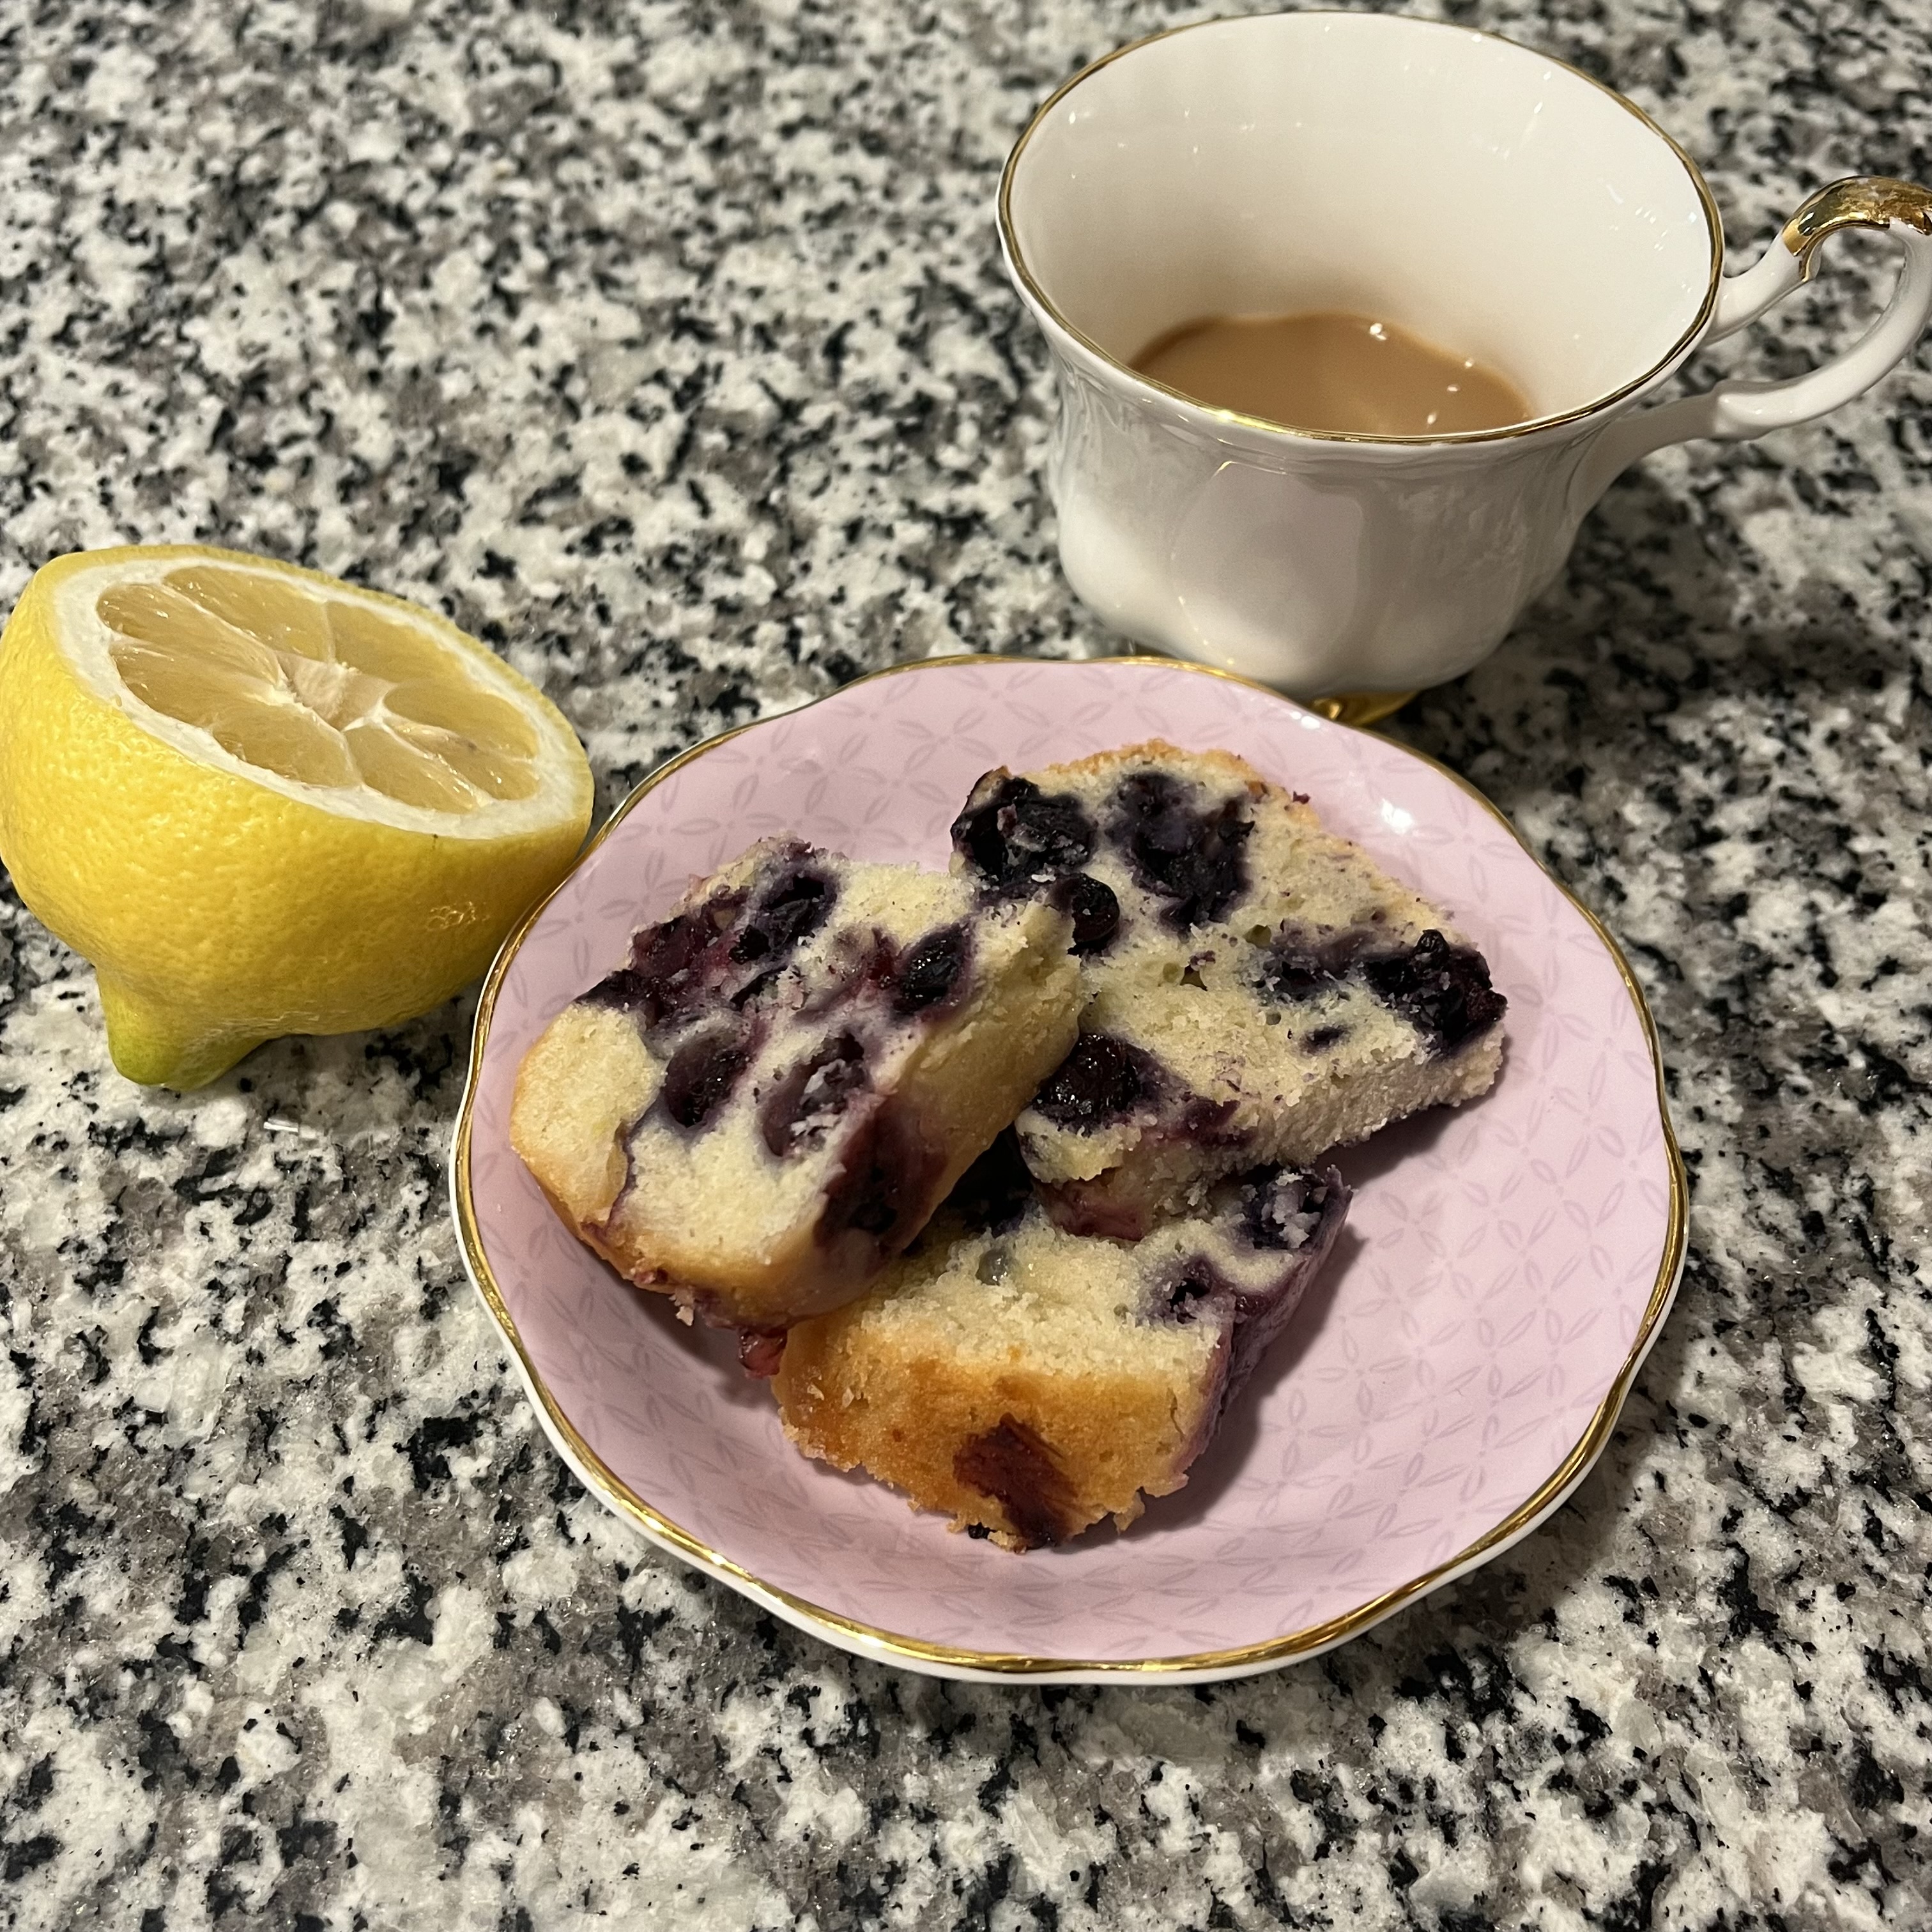 Indulge in Blueberry Lemon Bread, the Perfect Treat for Breakfast or Afternoon Tea